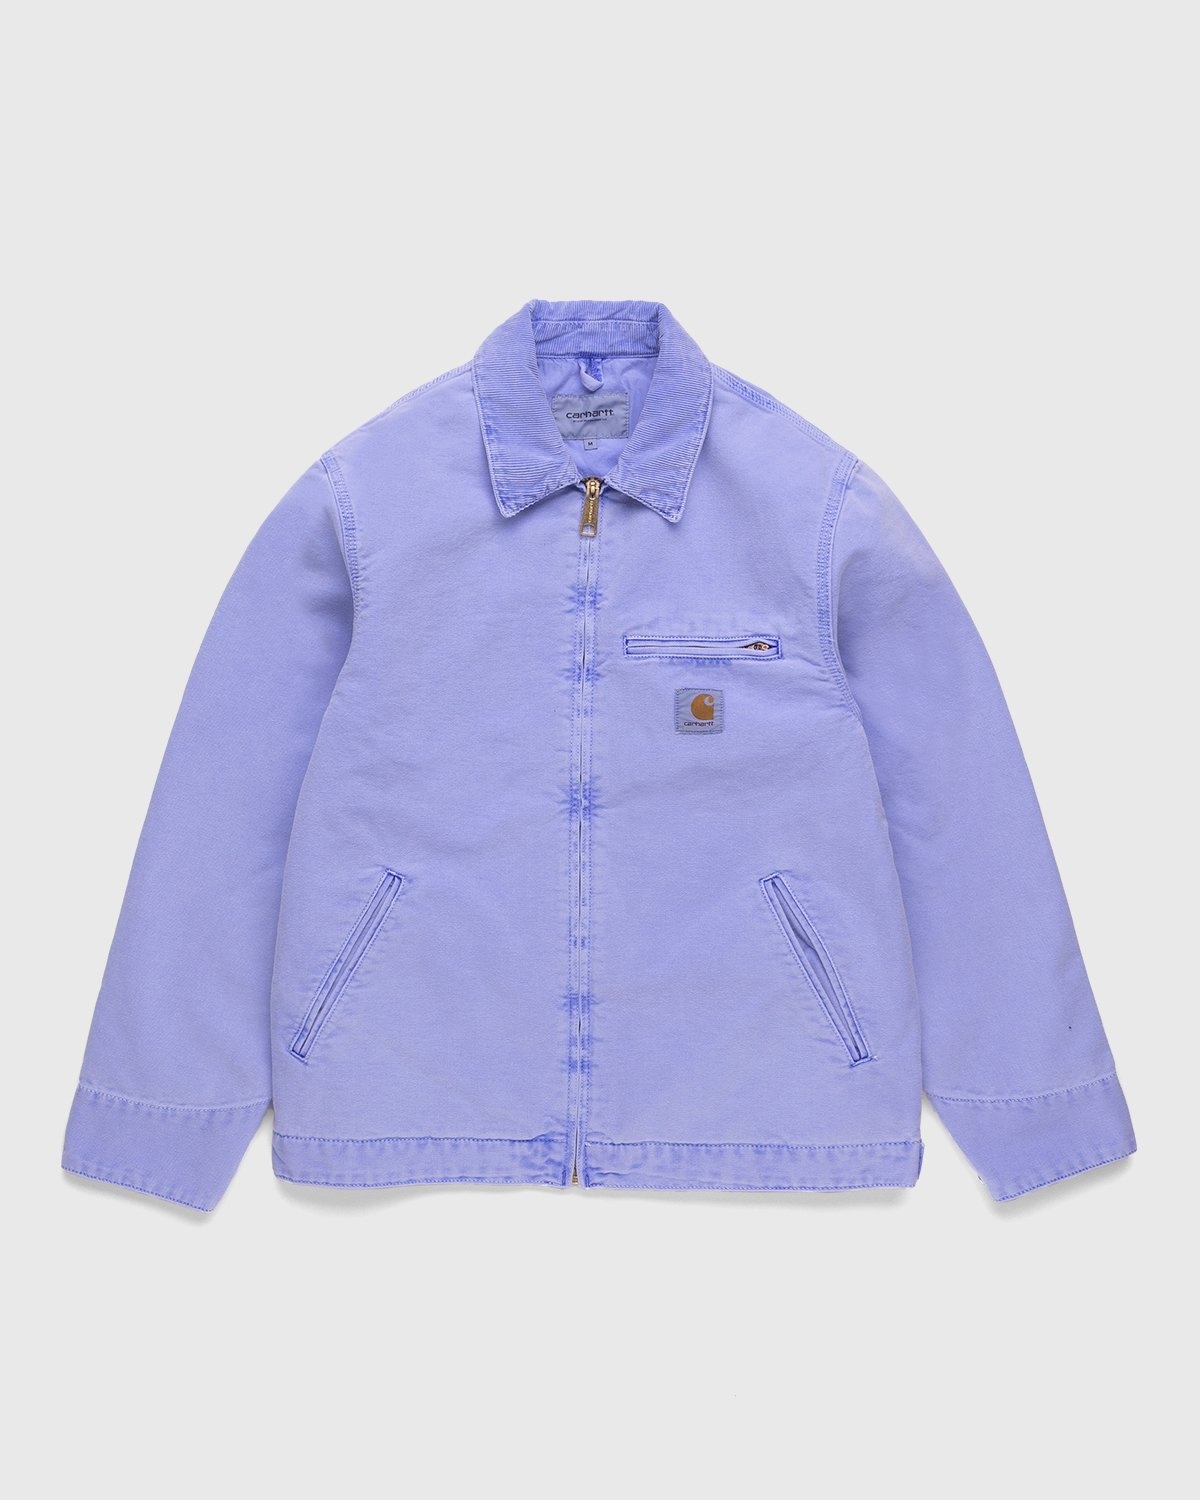 Carhartt WIP – Detroit Jacket Icy Water Faded - Outerwear - Blue - Image 1